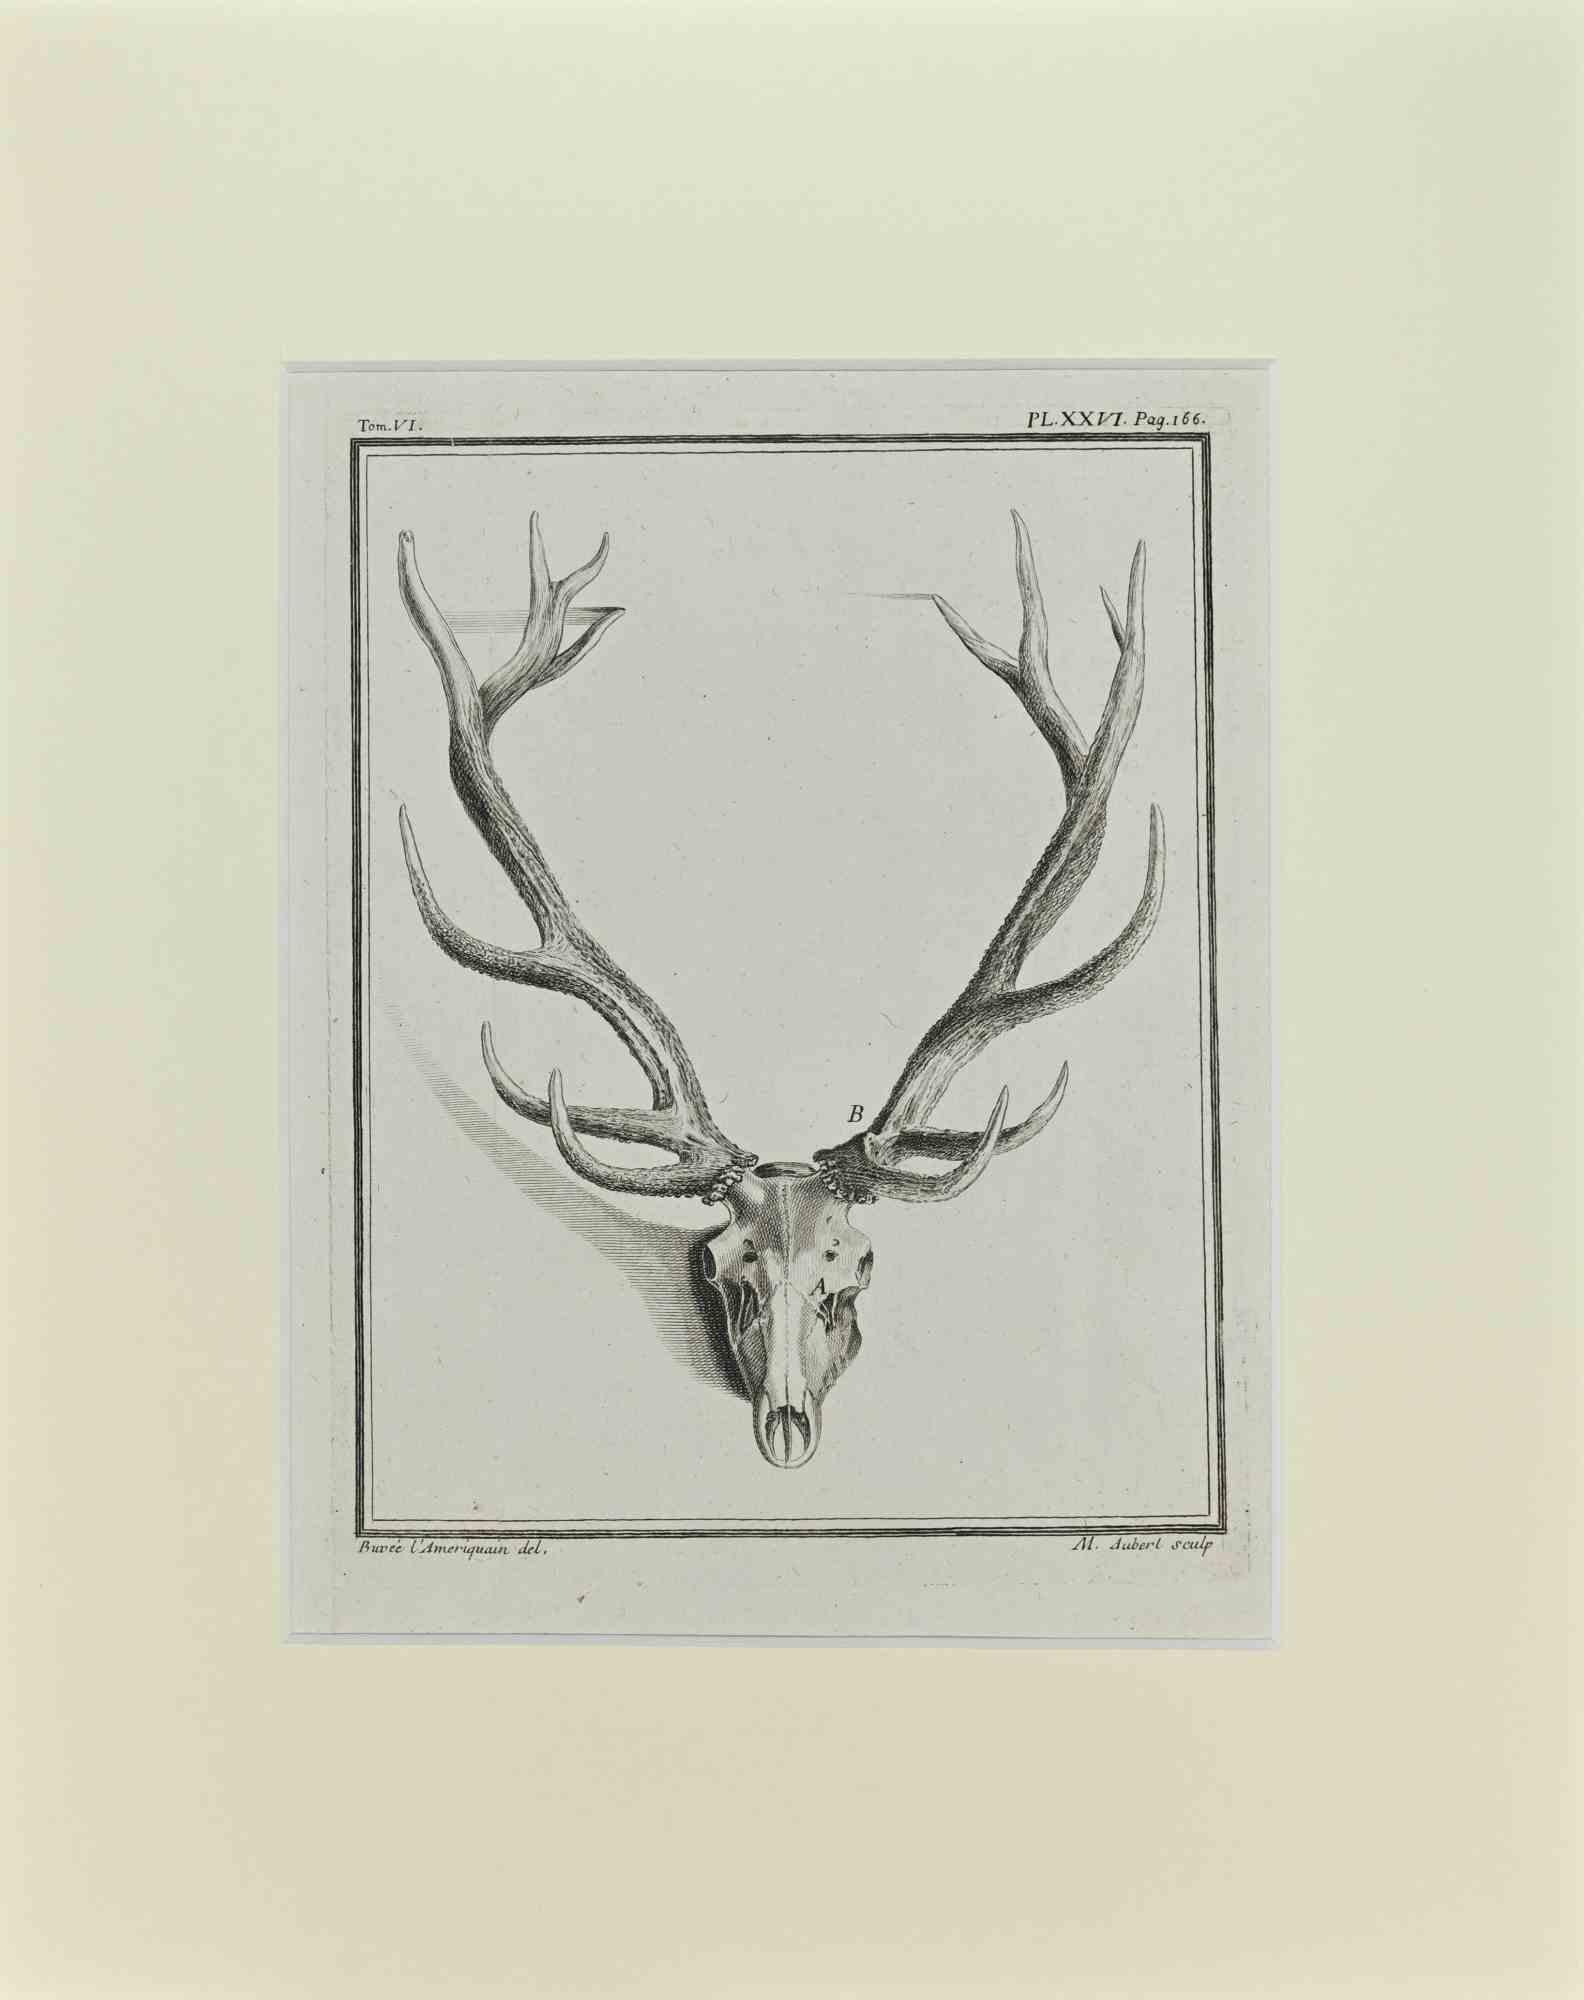 Deer Horns  is an artwork realized  by  Buvée l'Américain in 1771.  

Etching B./W. print  on ivory paper. Signed on  plate on the lower left margin.

The work is glued on cardboard. Total dimensions: 35x28 cm.

The artwork belongs to the suite